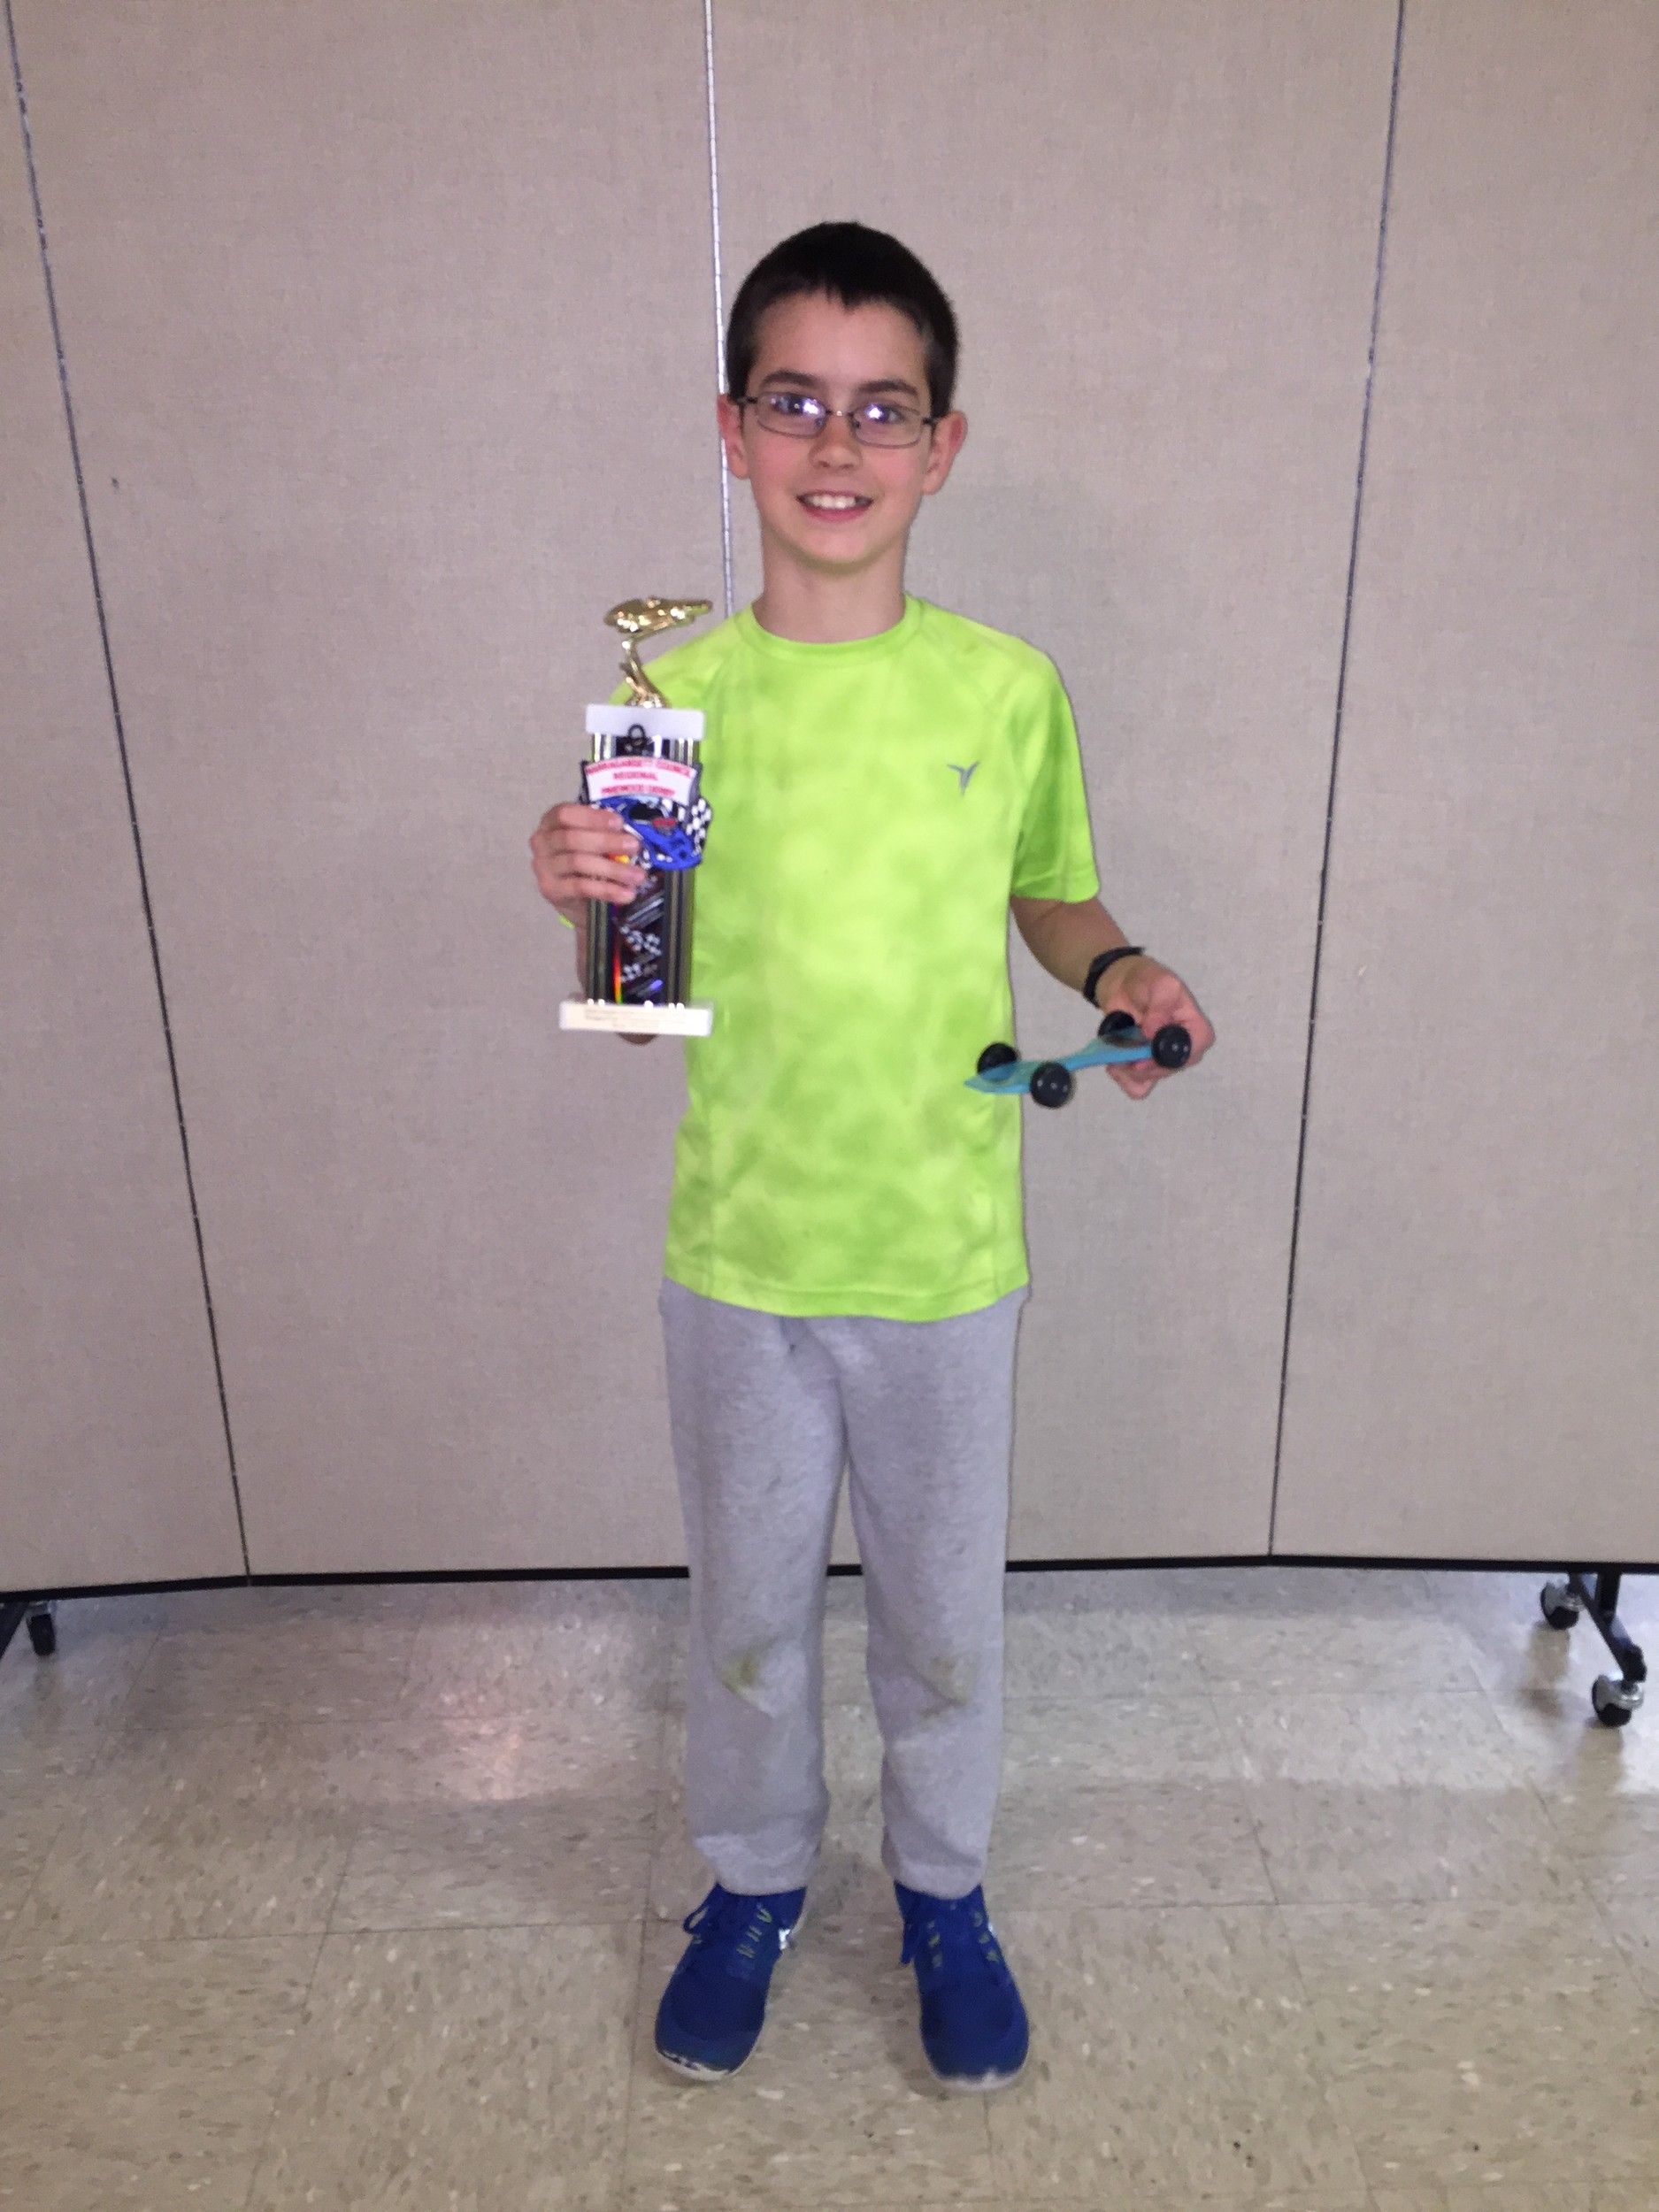 Gio Perrotti of Pack 82 Portsmouth poses with his second-place trophy and car.